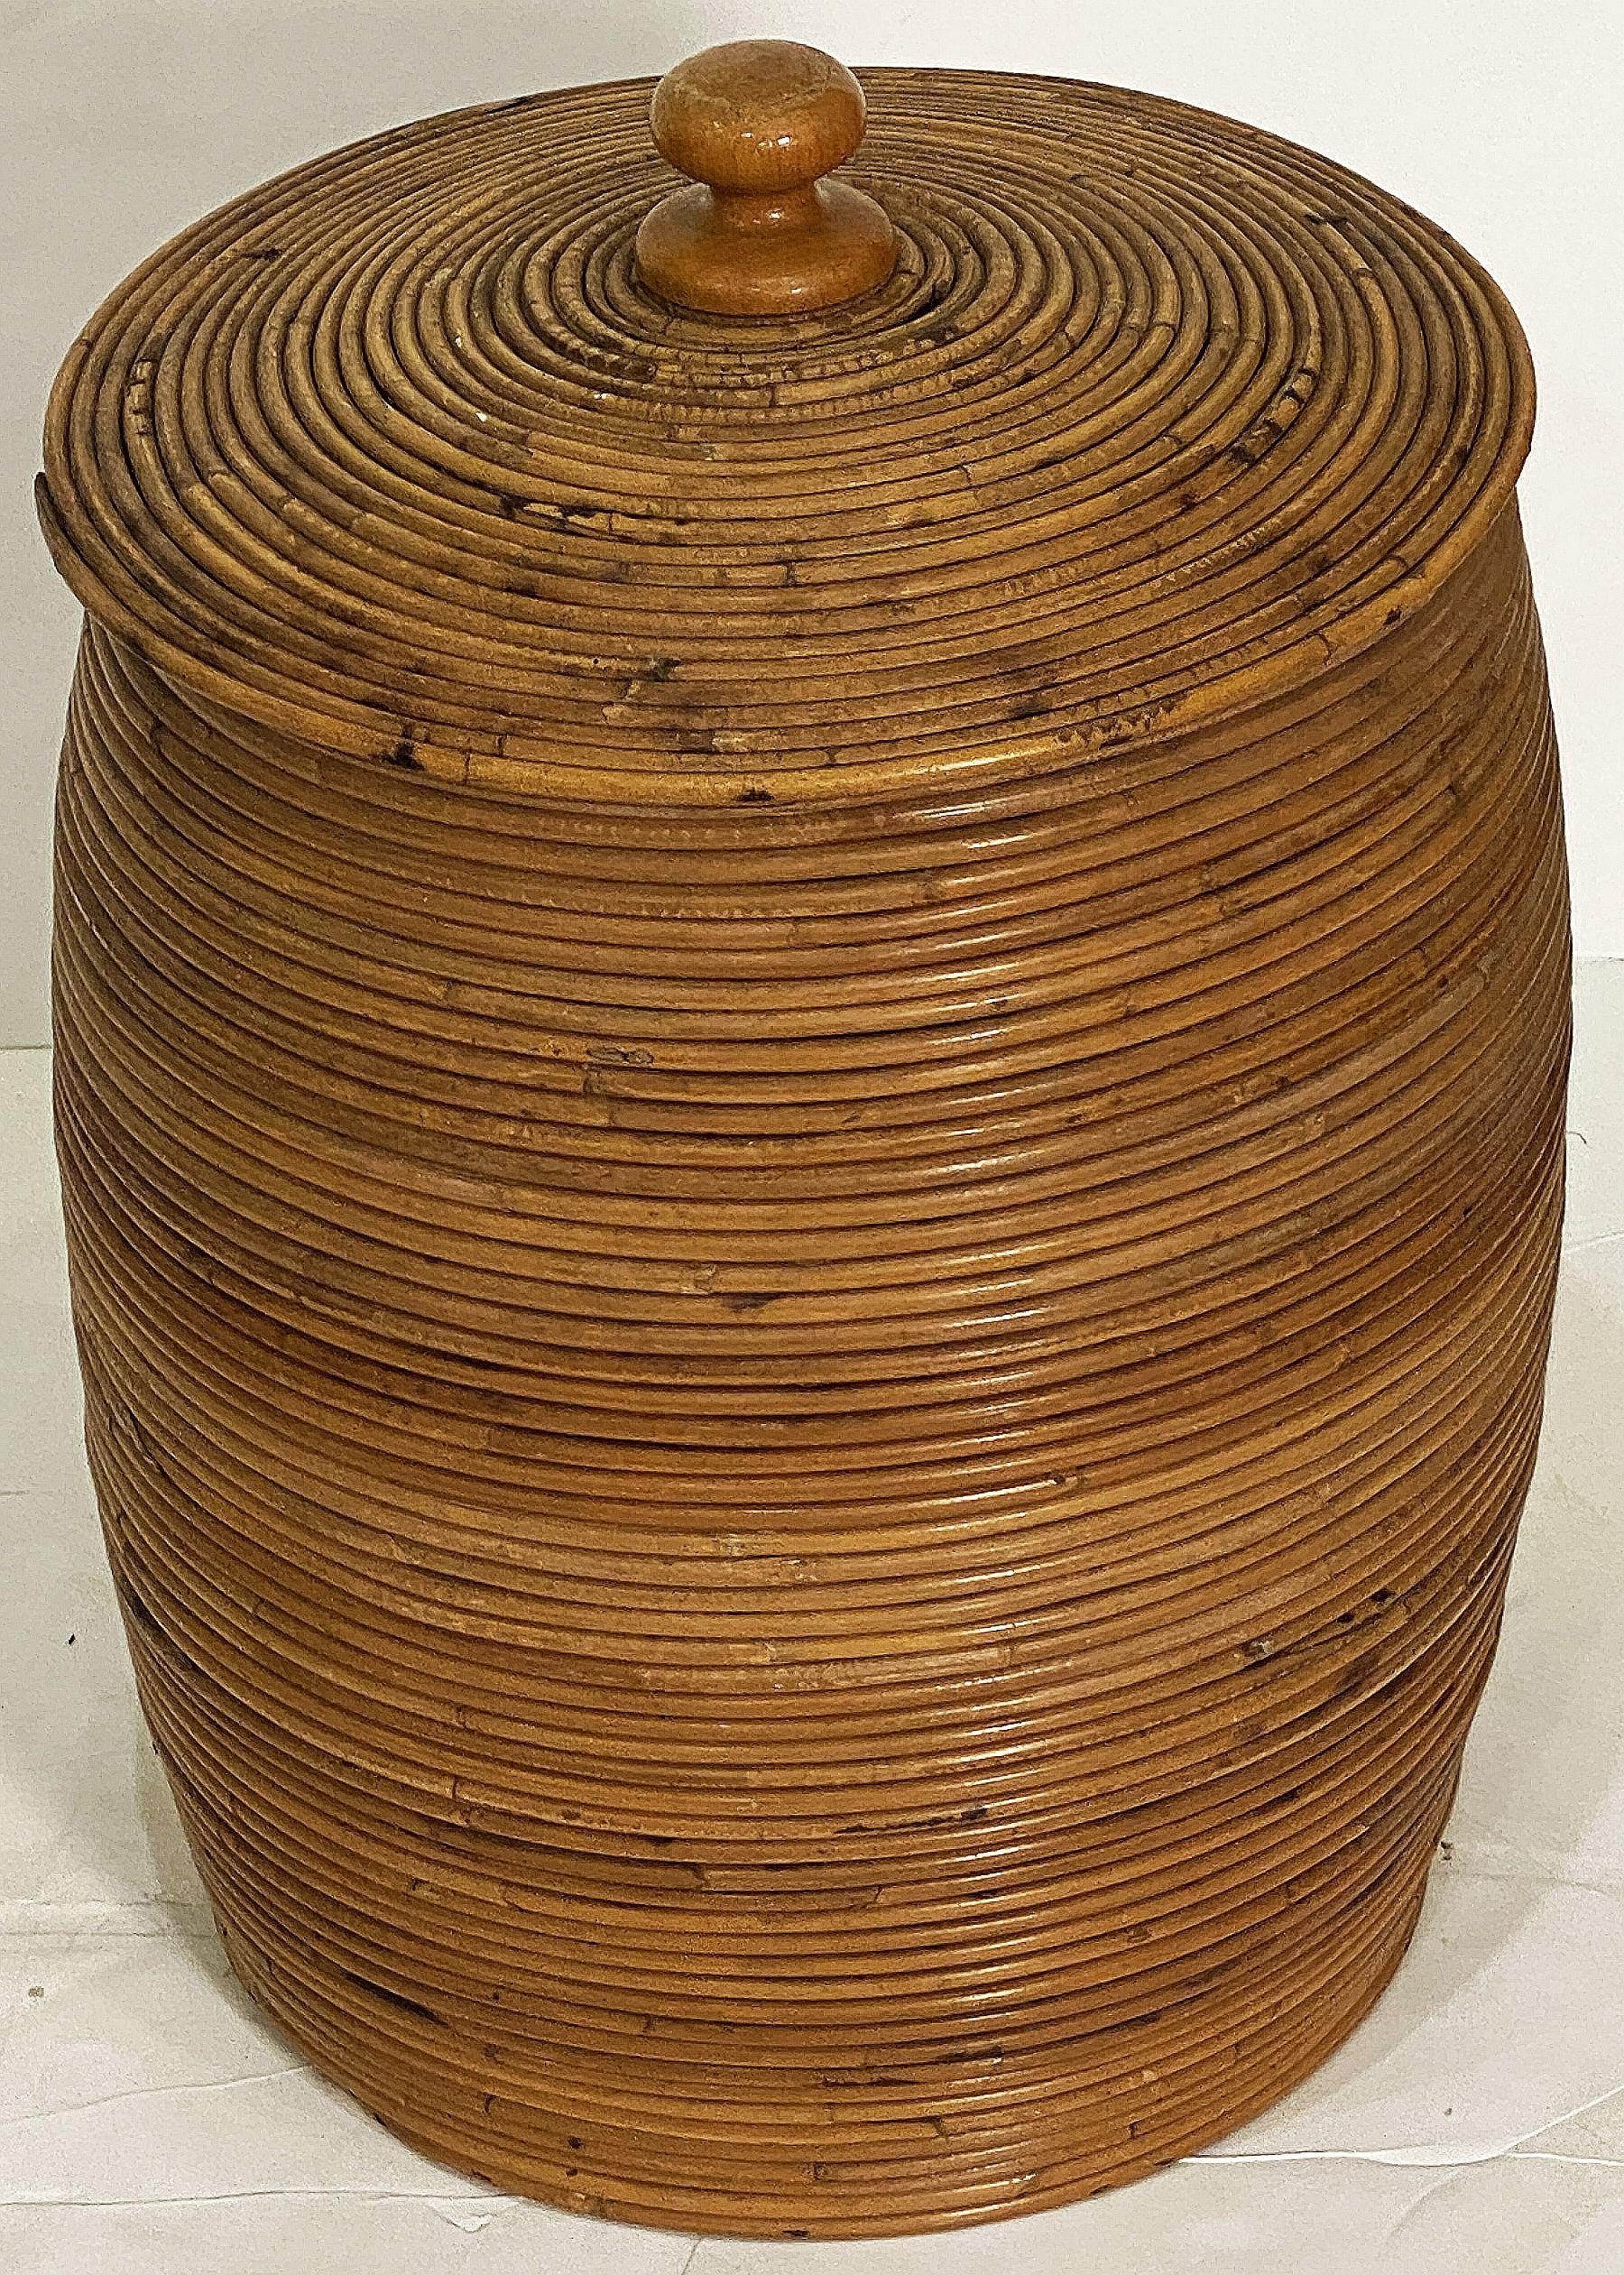 A fine large French basket container featuring a removable round top lid with wooden finial set upon a cylindrical body of hand-woven spiral cane work.

Dimensions are H 22 3/4 inches by Diameter 15 3/4 inches

 